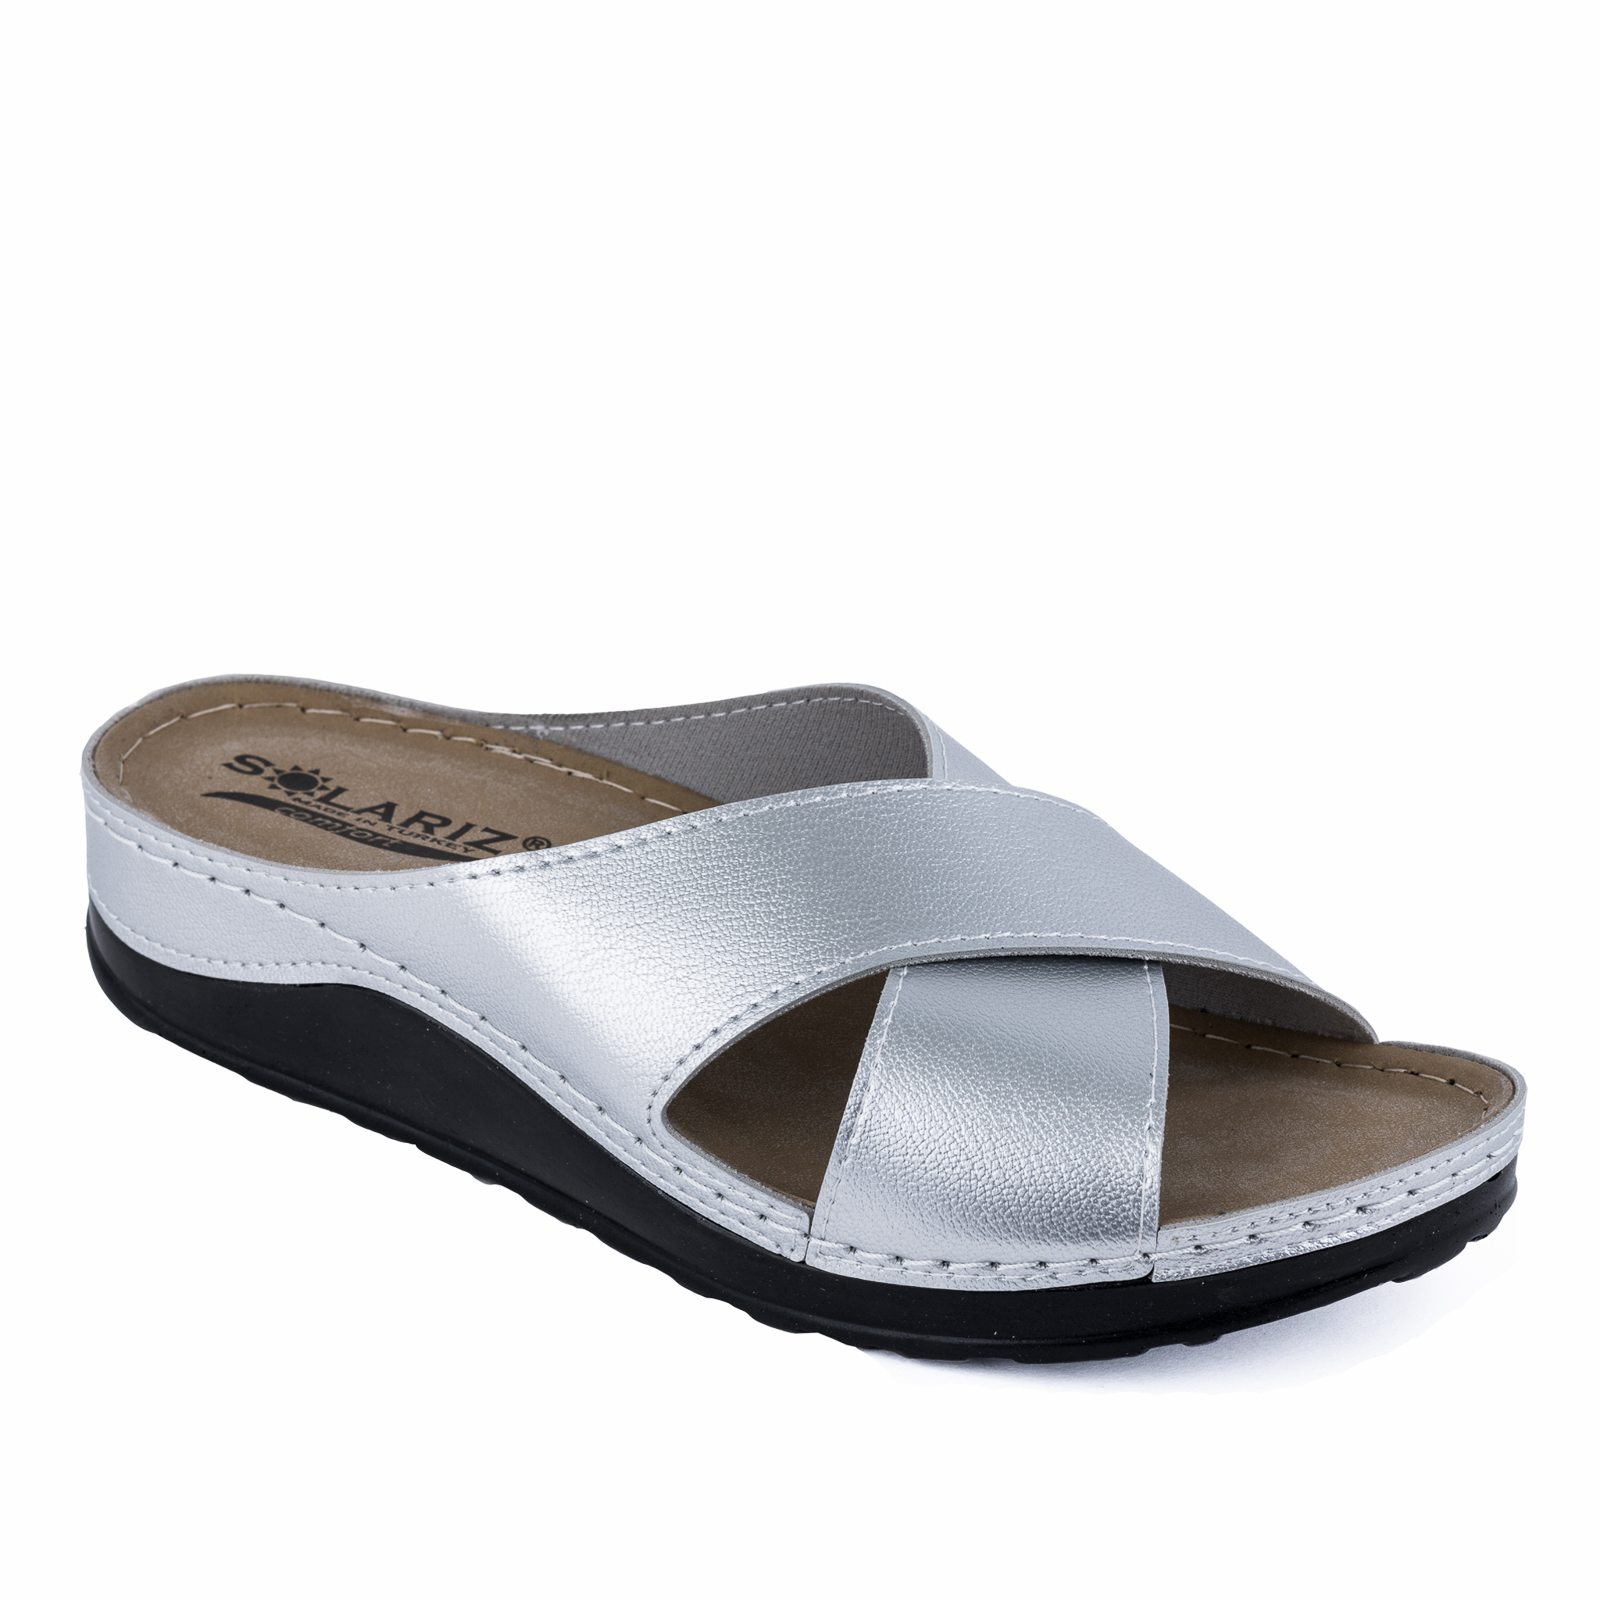 ANATOMICAL CROSS STRAP SLIPPERS - SILVER